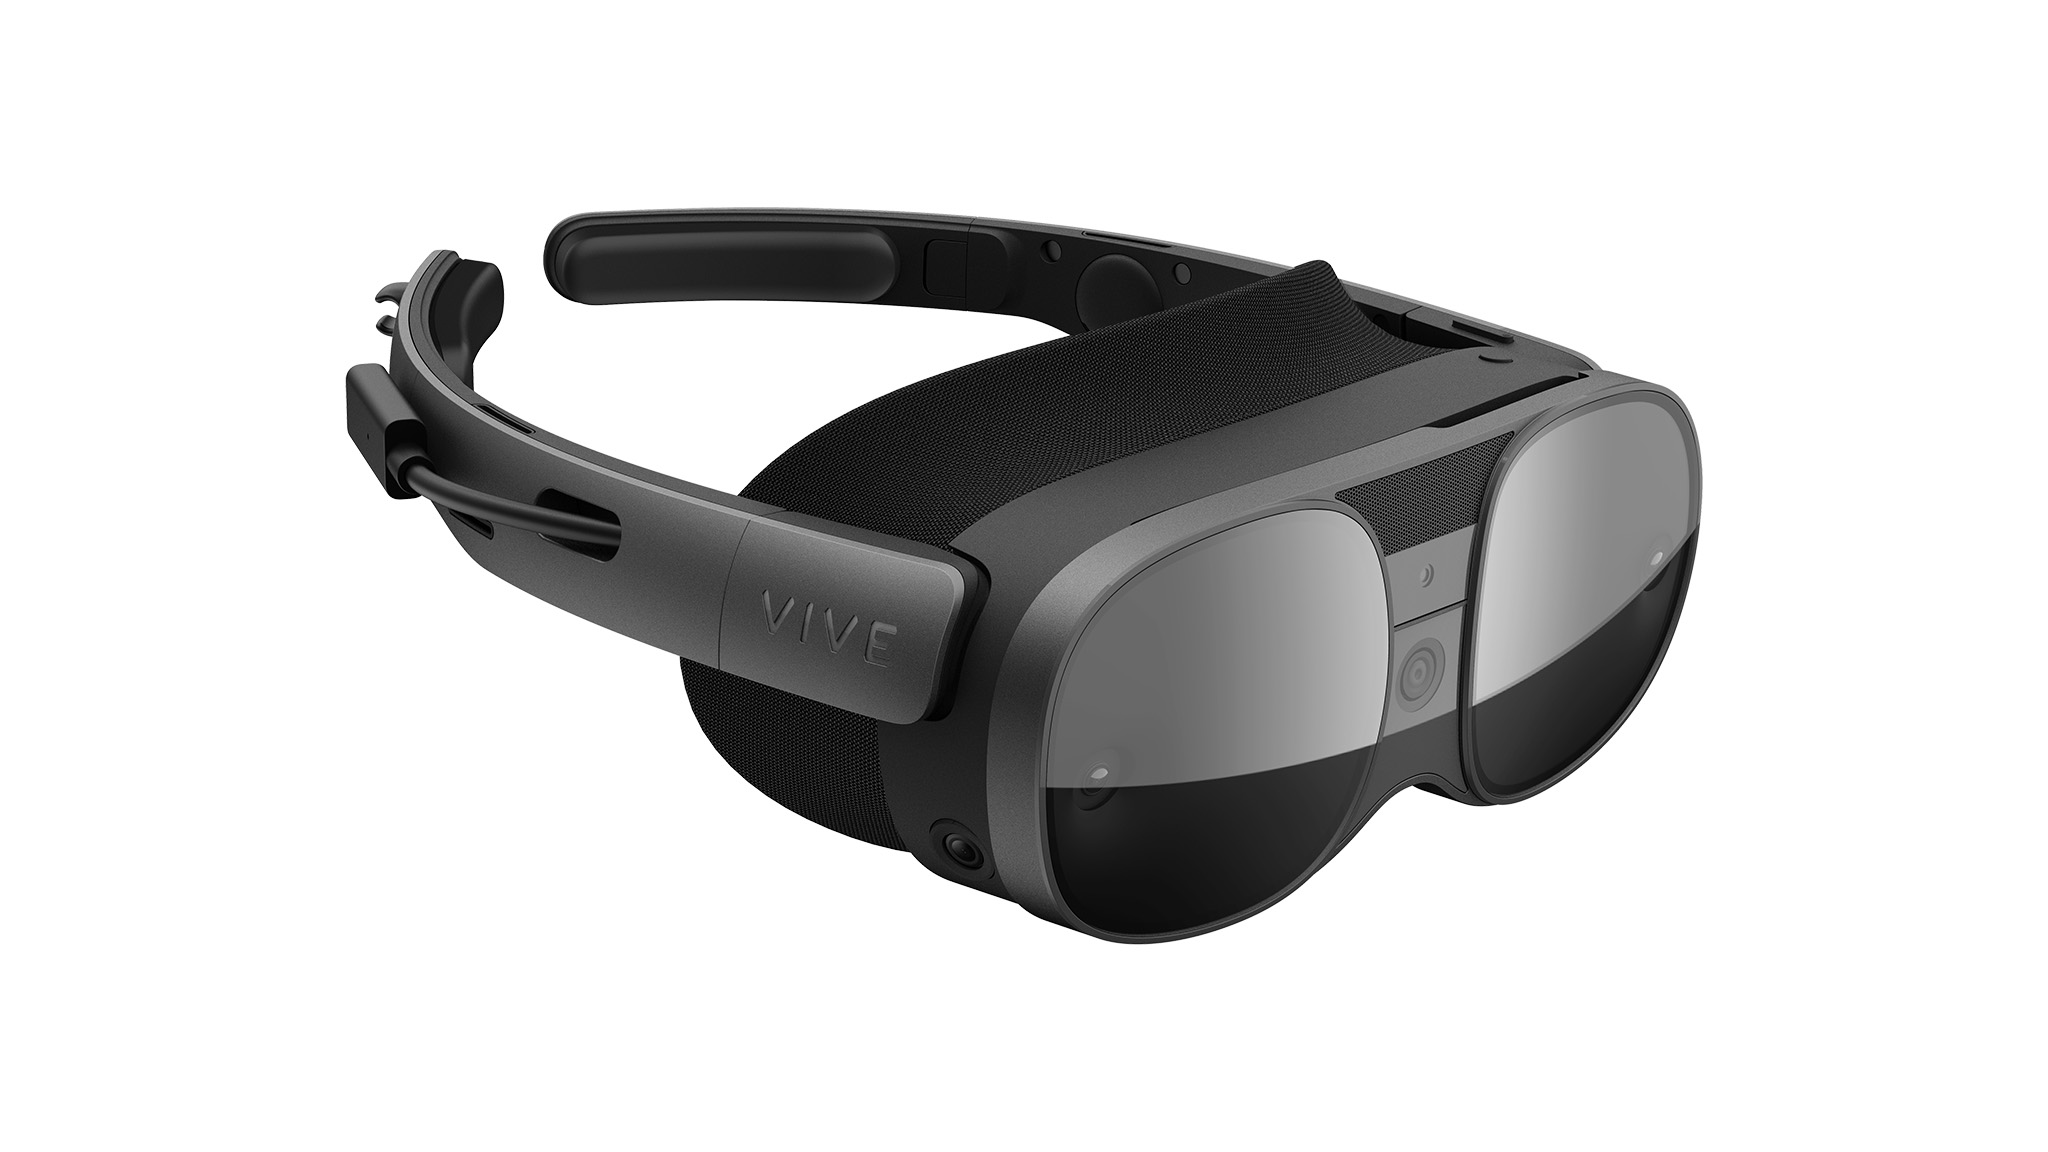 HTC Vive XR Elite product render showing the glasses head strap